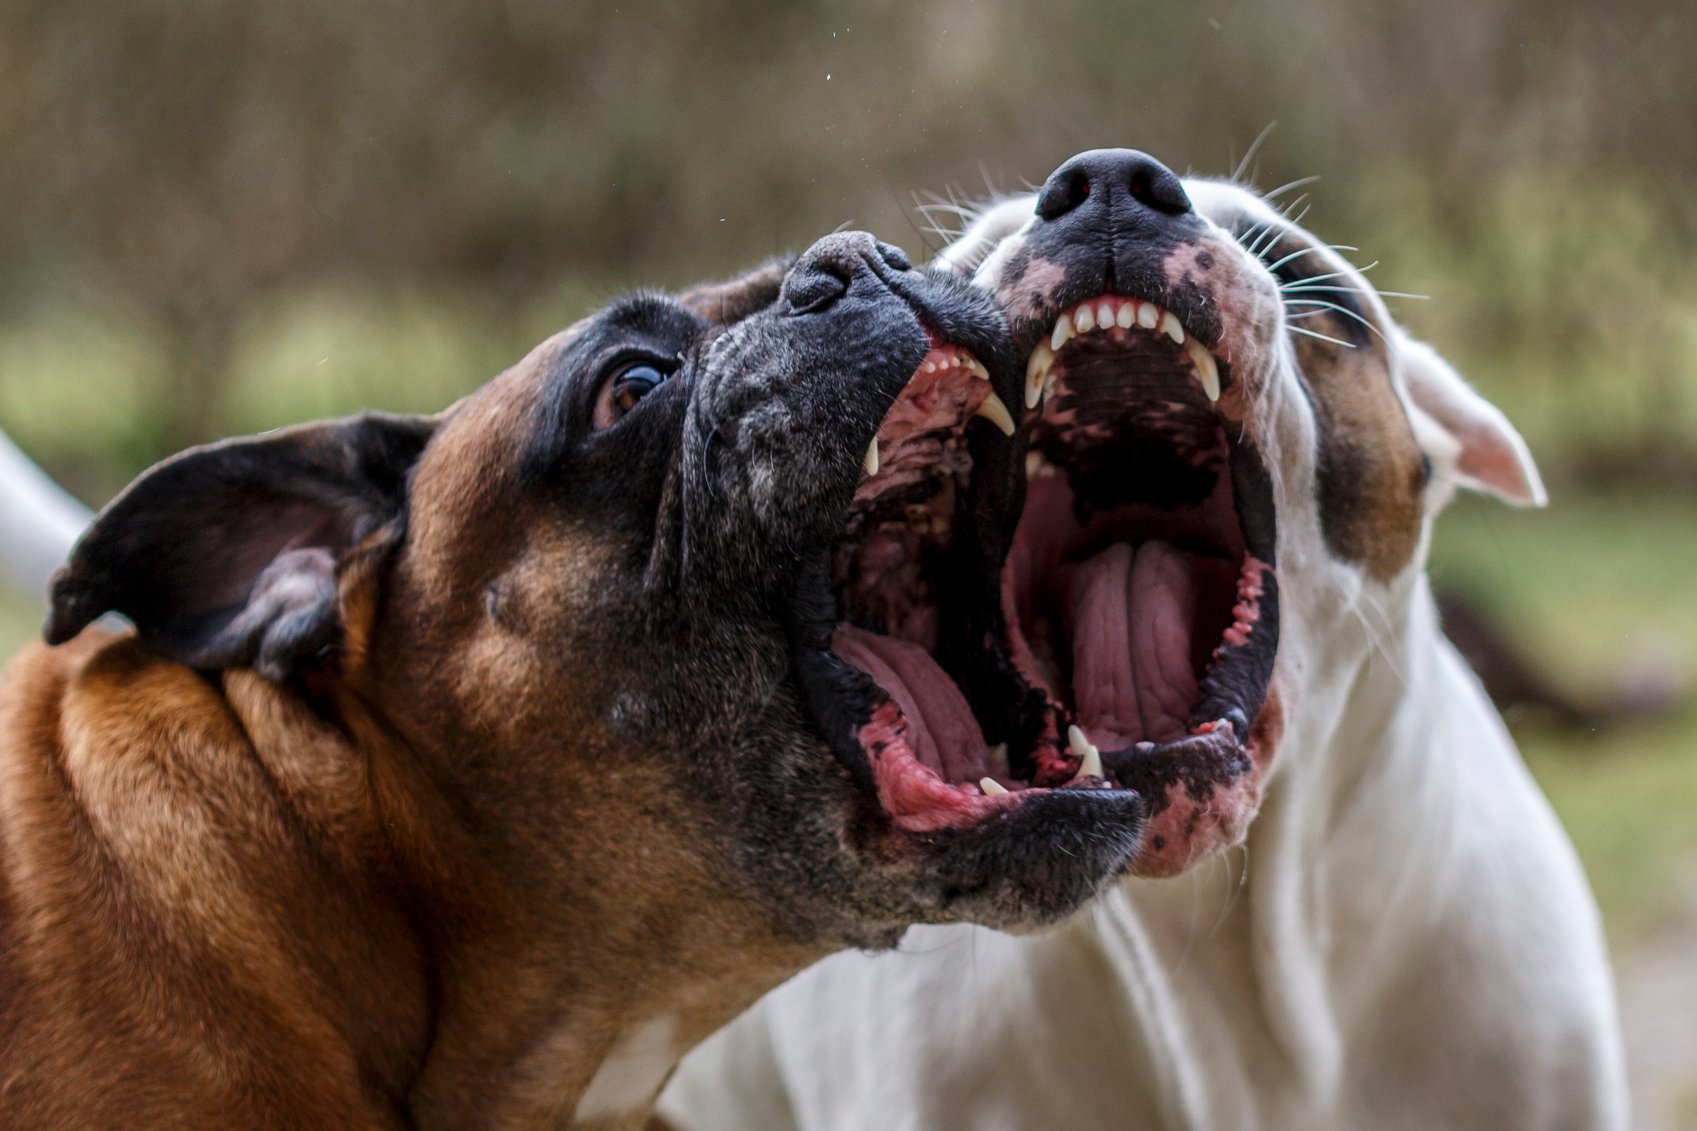 Fighting dogs. Dogs barking at each other, showing fangs.